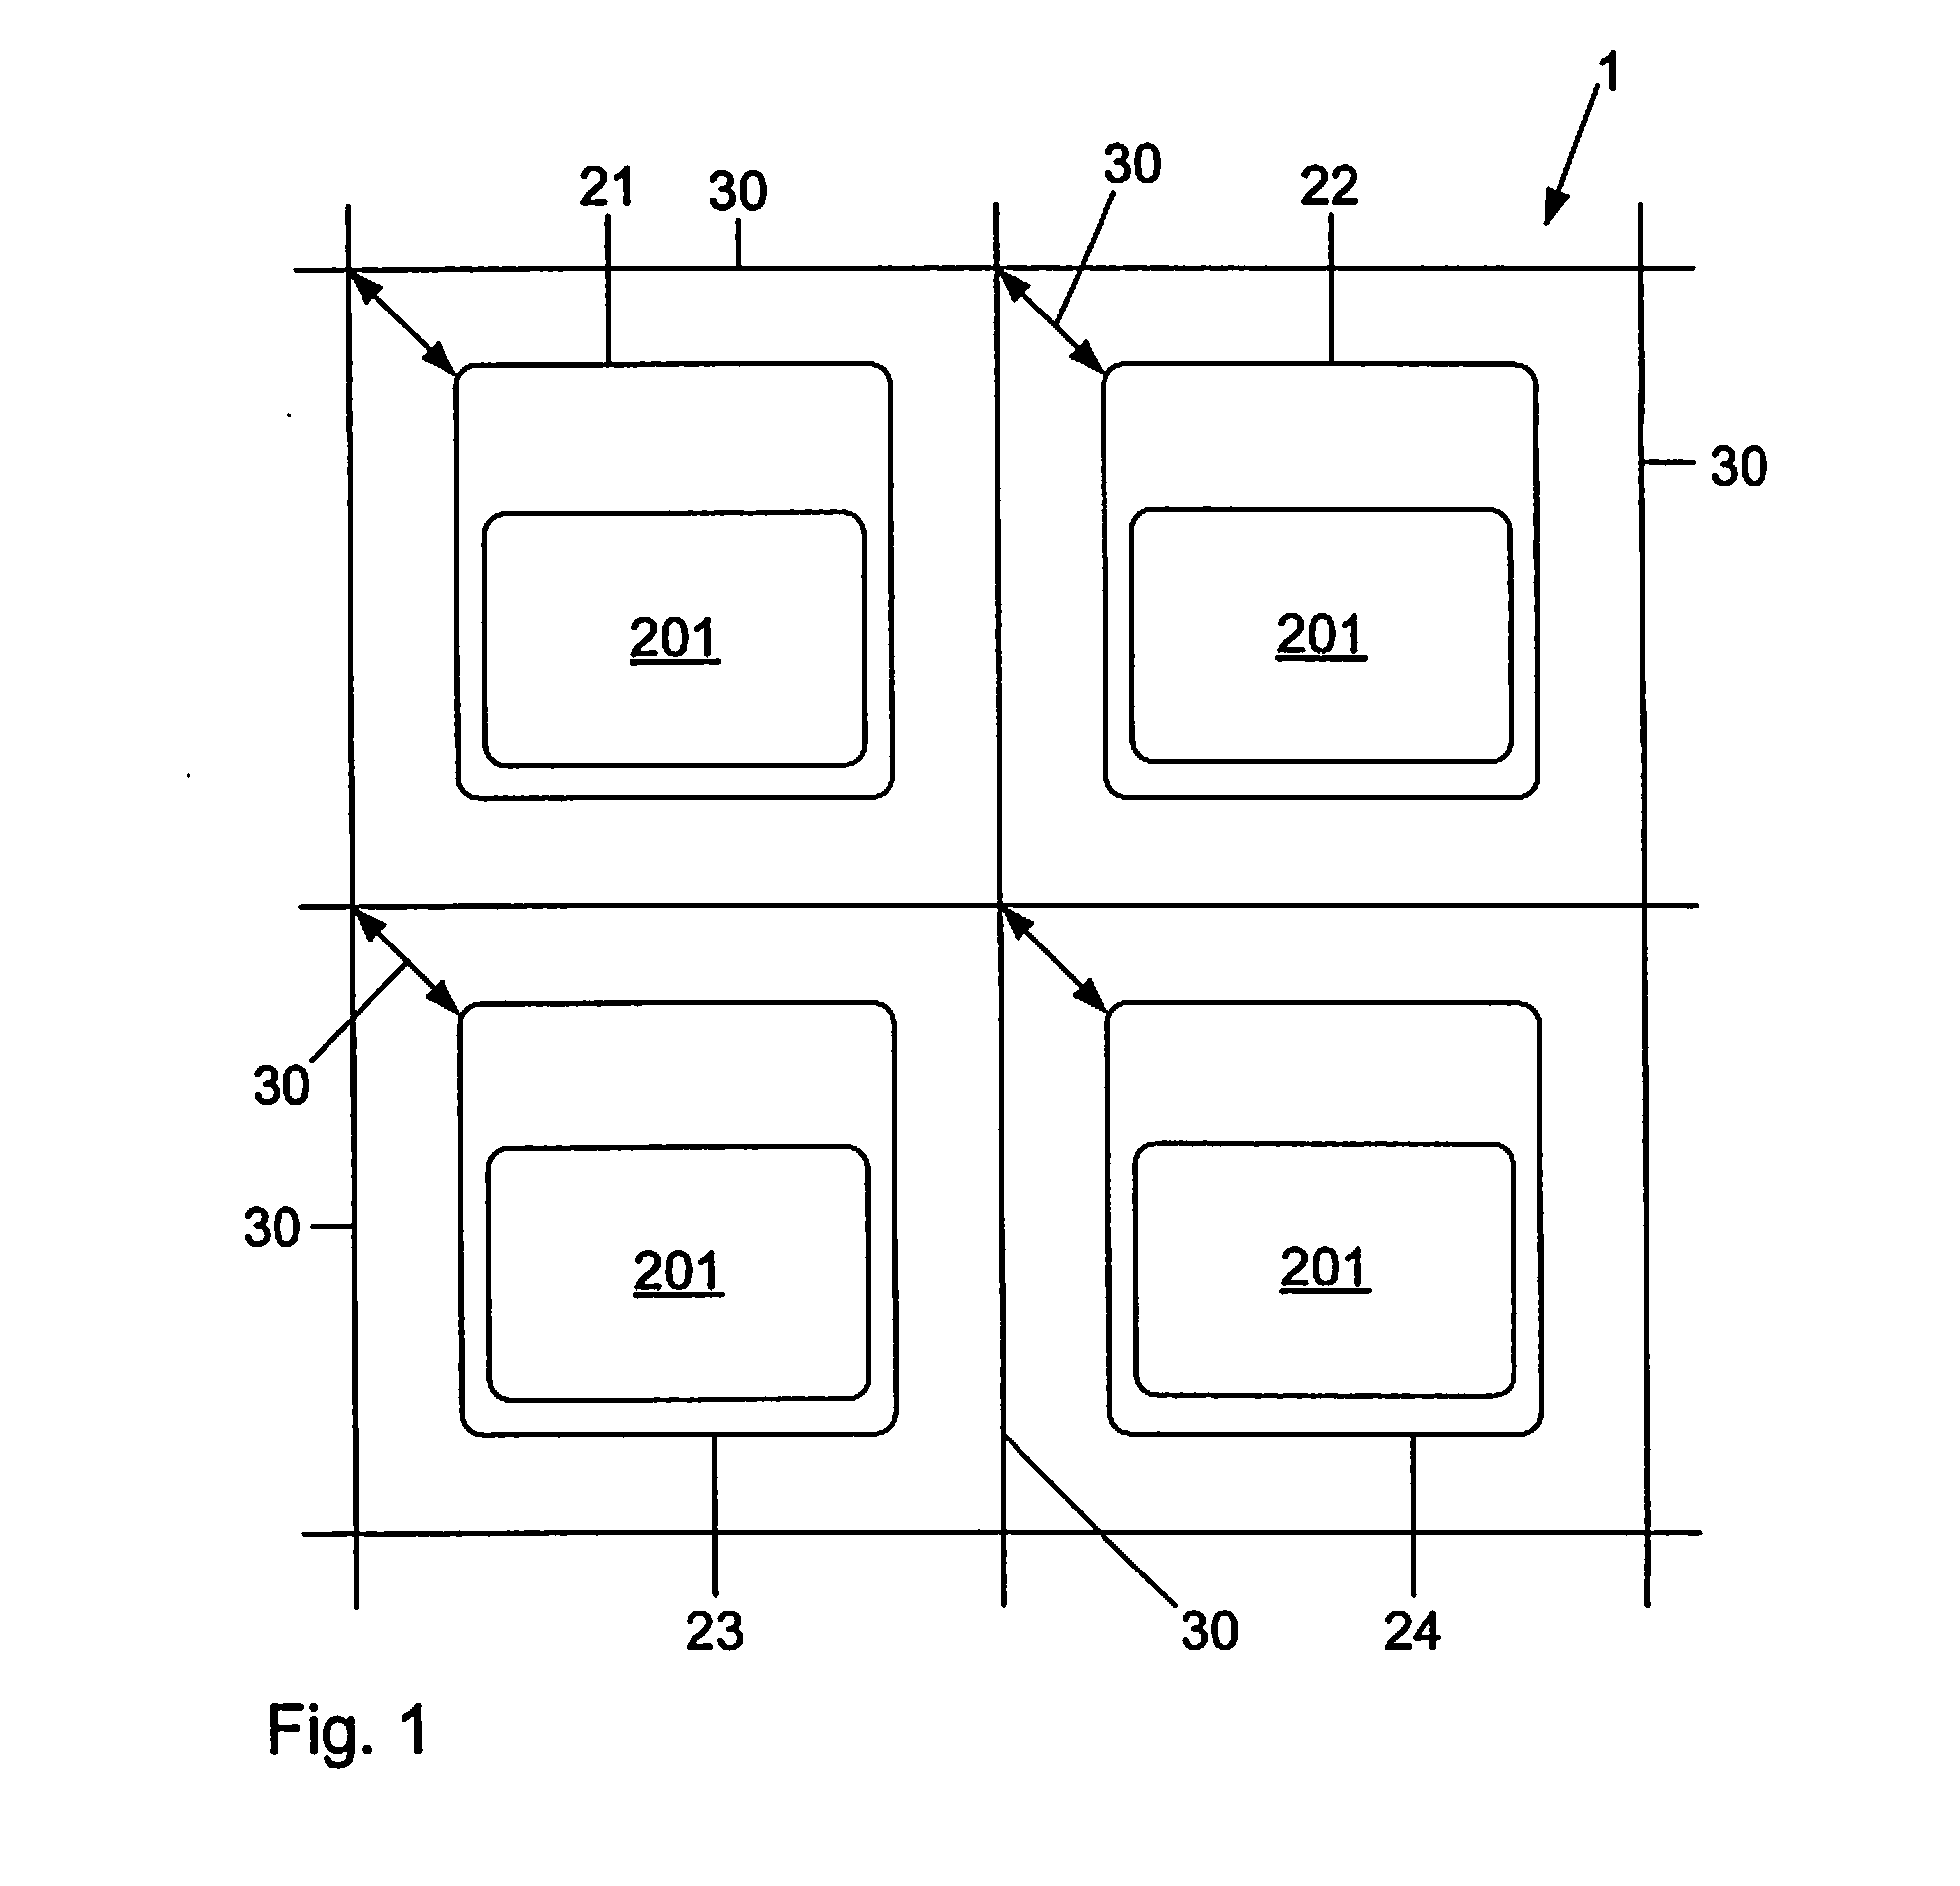 Method for Executing One or More Programs on a Multi-Core Processor and Many-Core Processor